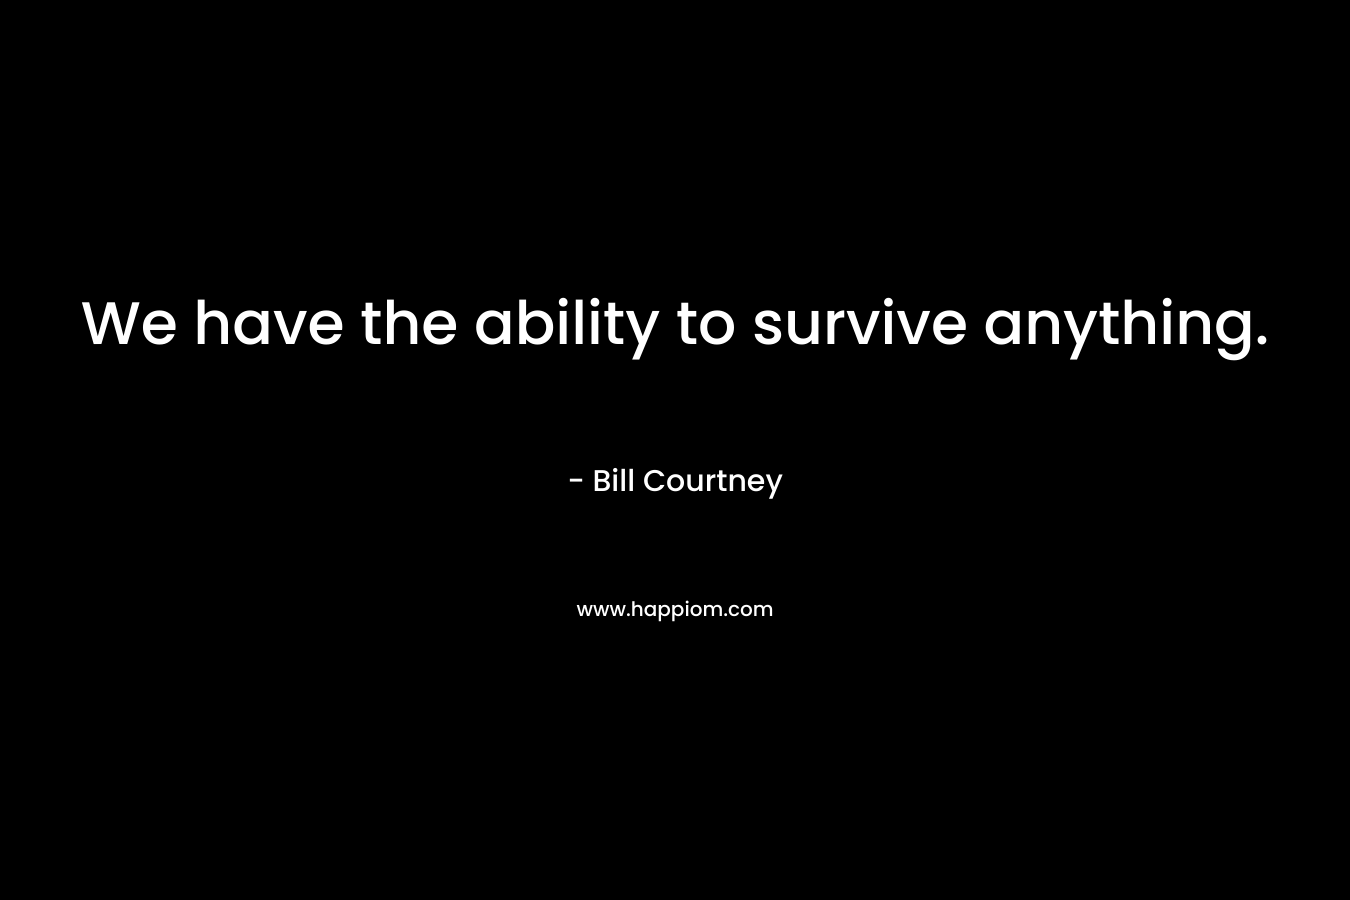 We have the ability to survive anything. – Bill Courtney